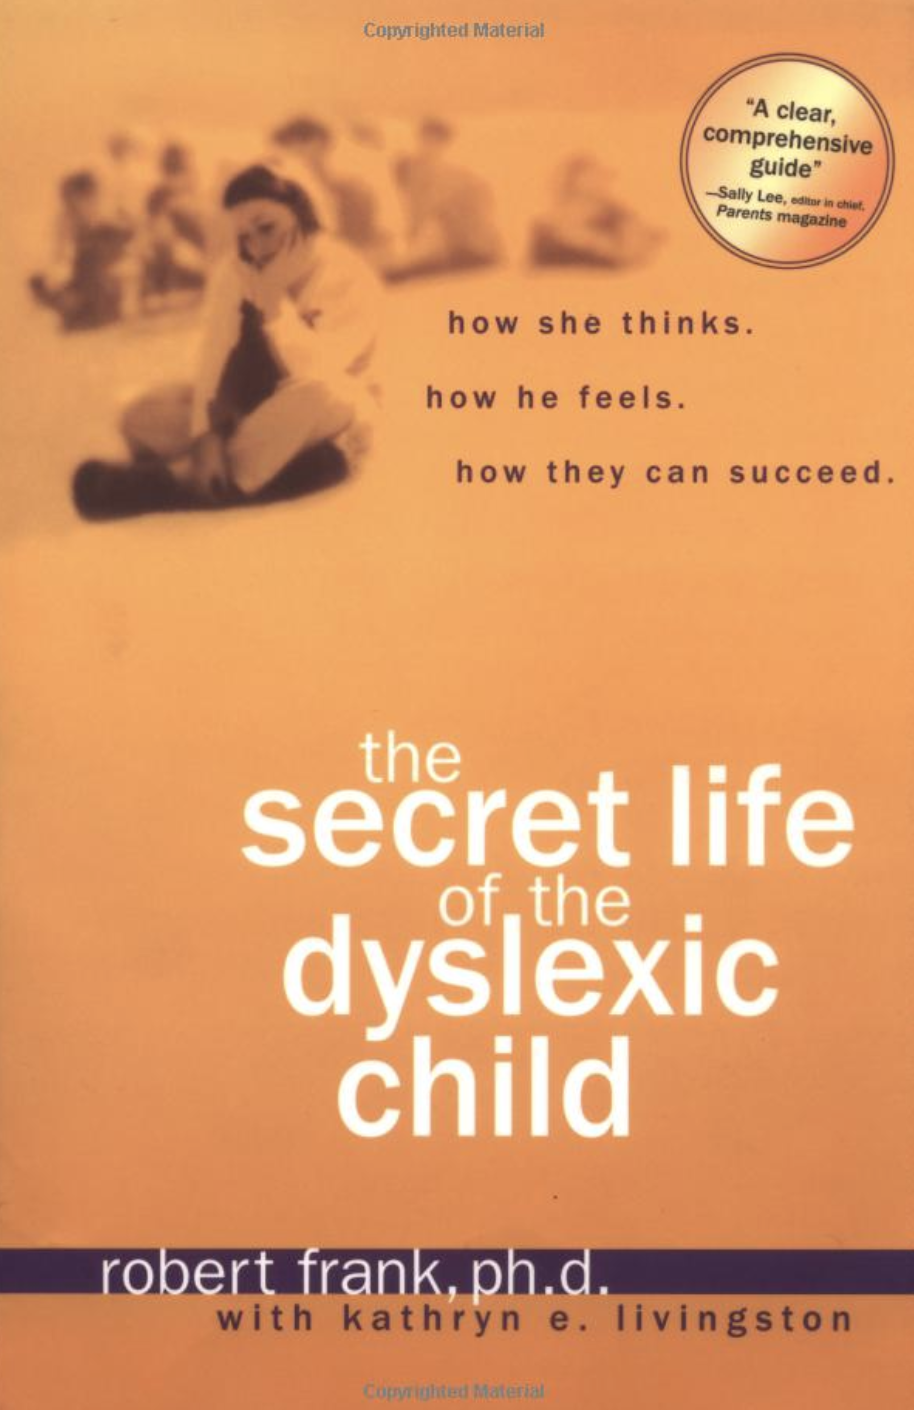 The Secret Life of the Dyslexic Child: How She thinks. How He Feels. How They Can Succeed.